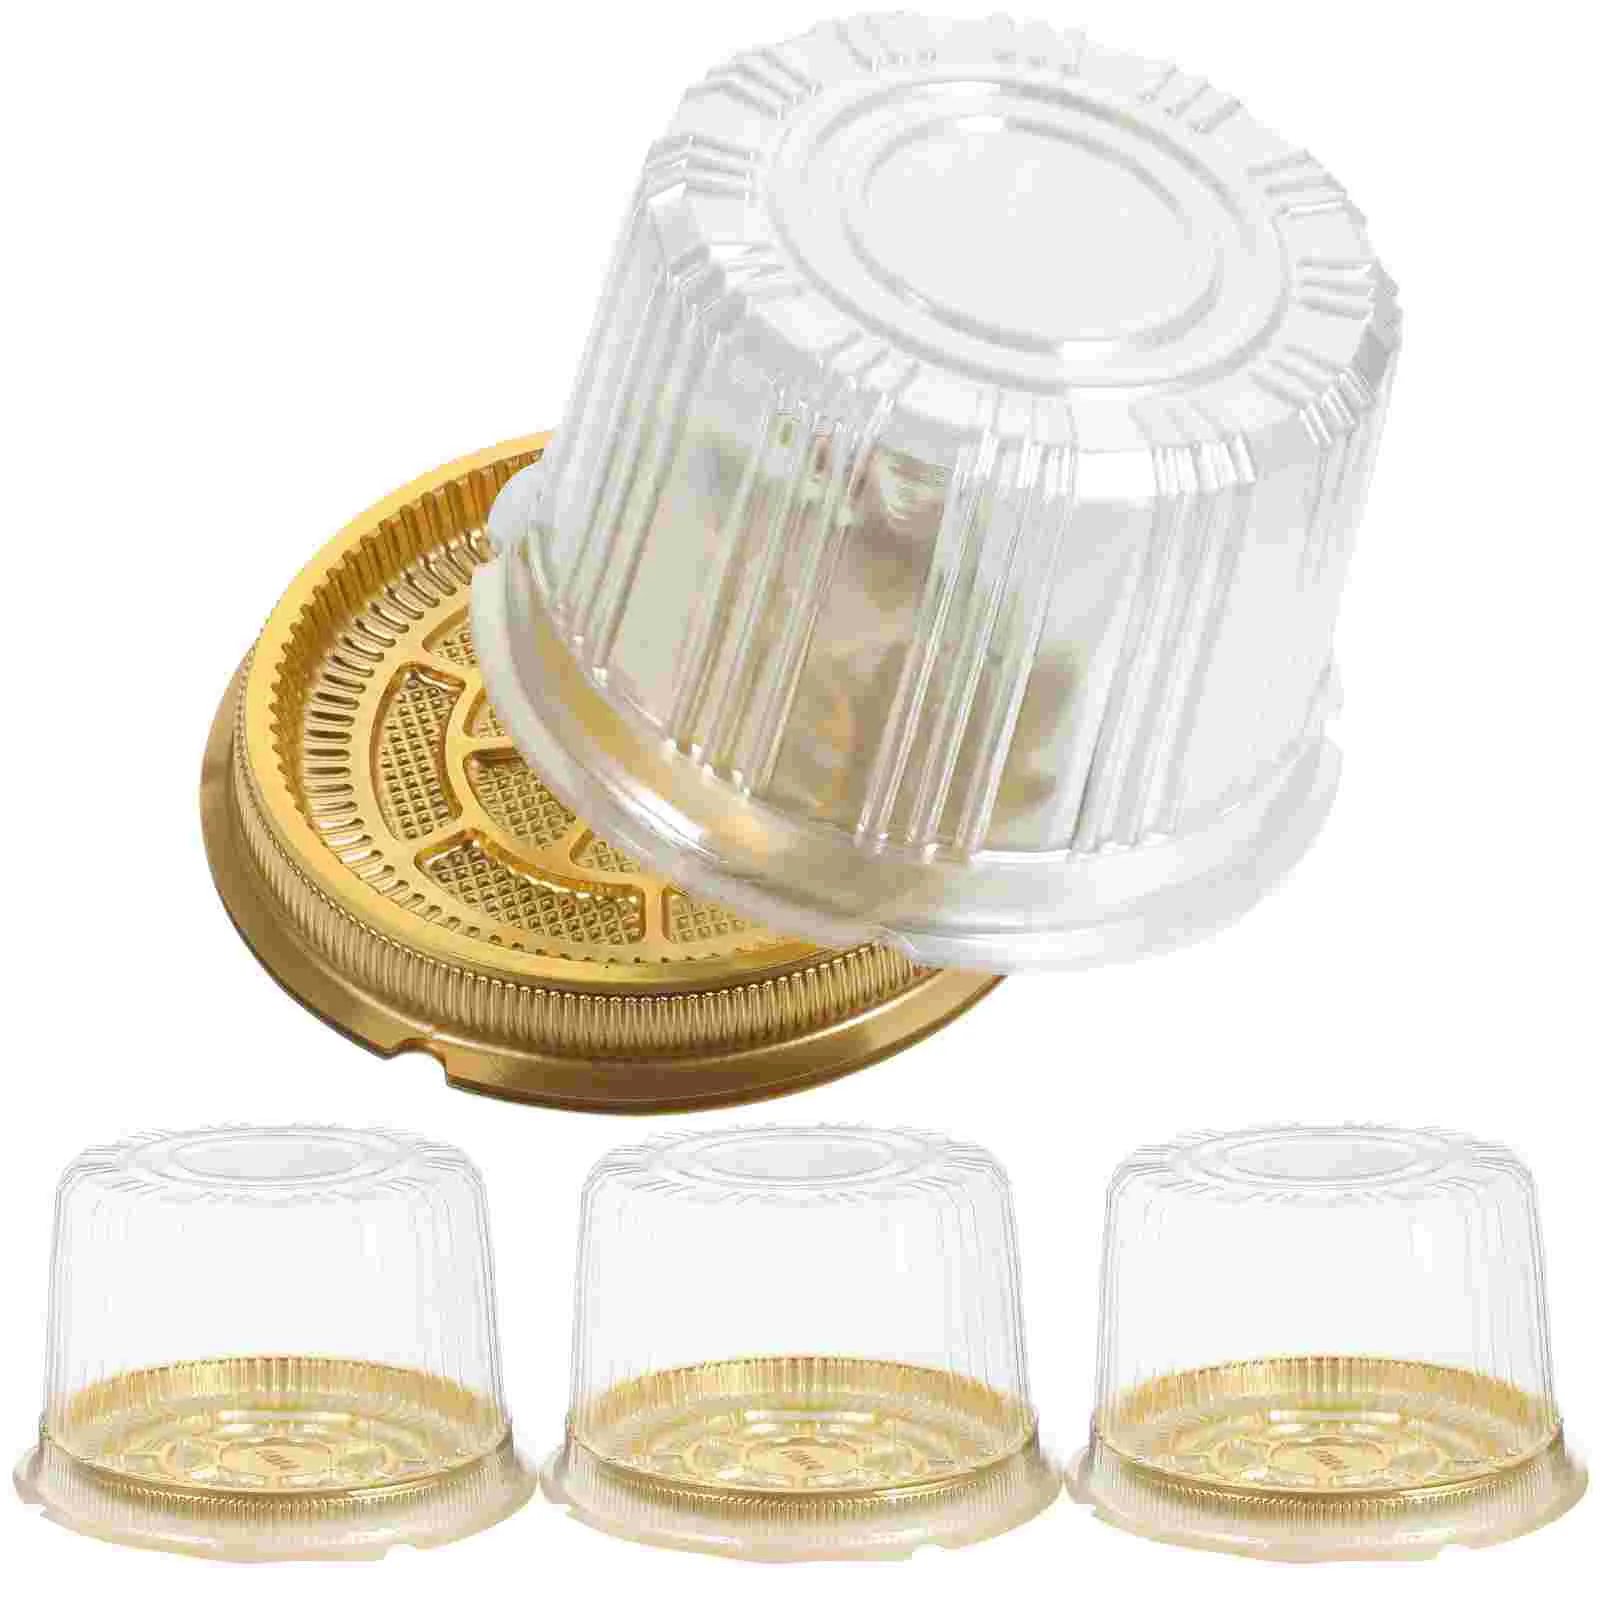 

Plastic Cake Containers Dome Lids Mini Cupcake Boxes Clear Dessert Muffin Mooncake Holder Round Cake Carrier Transport